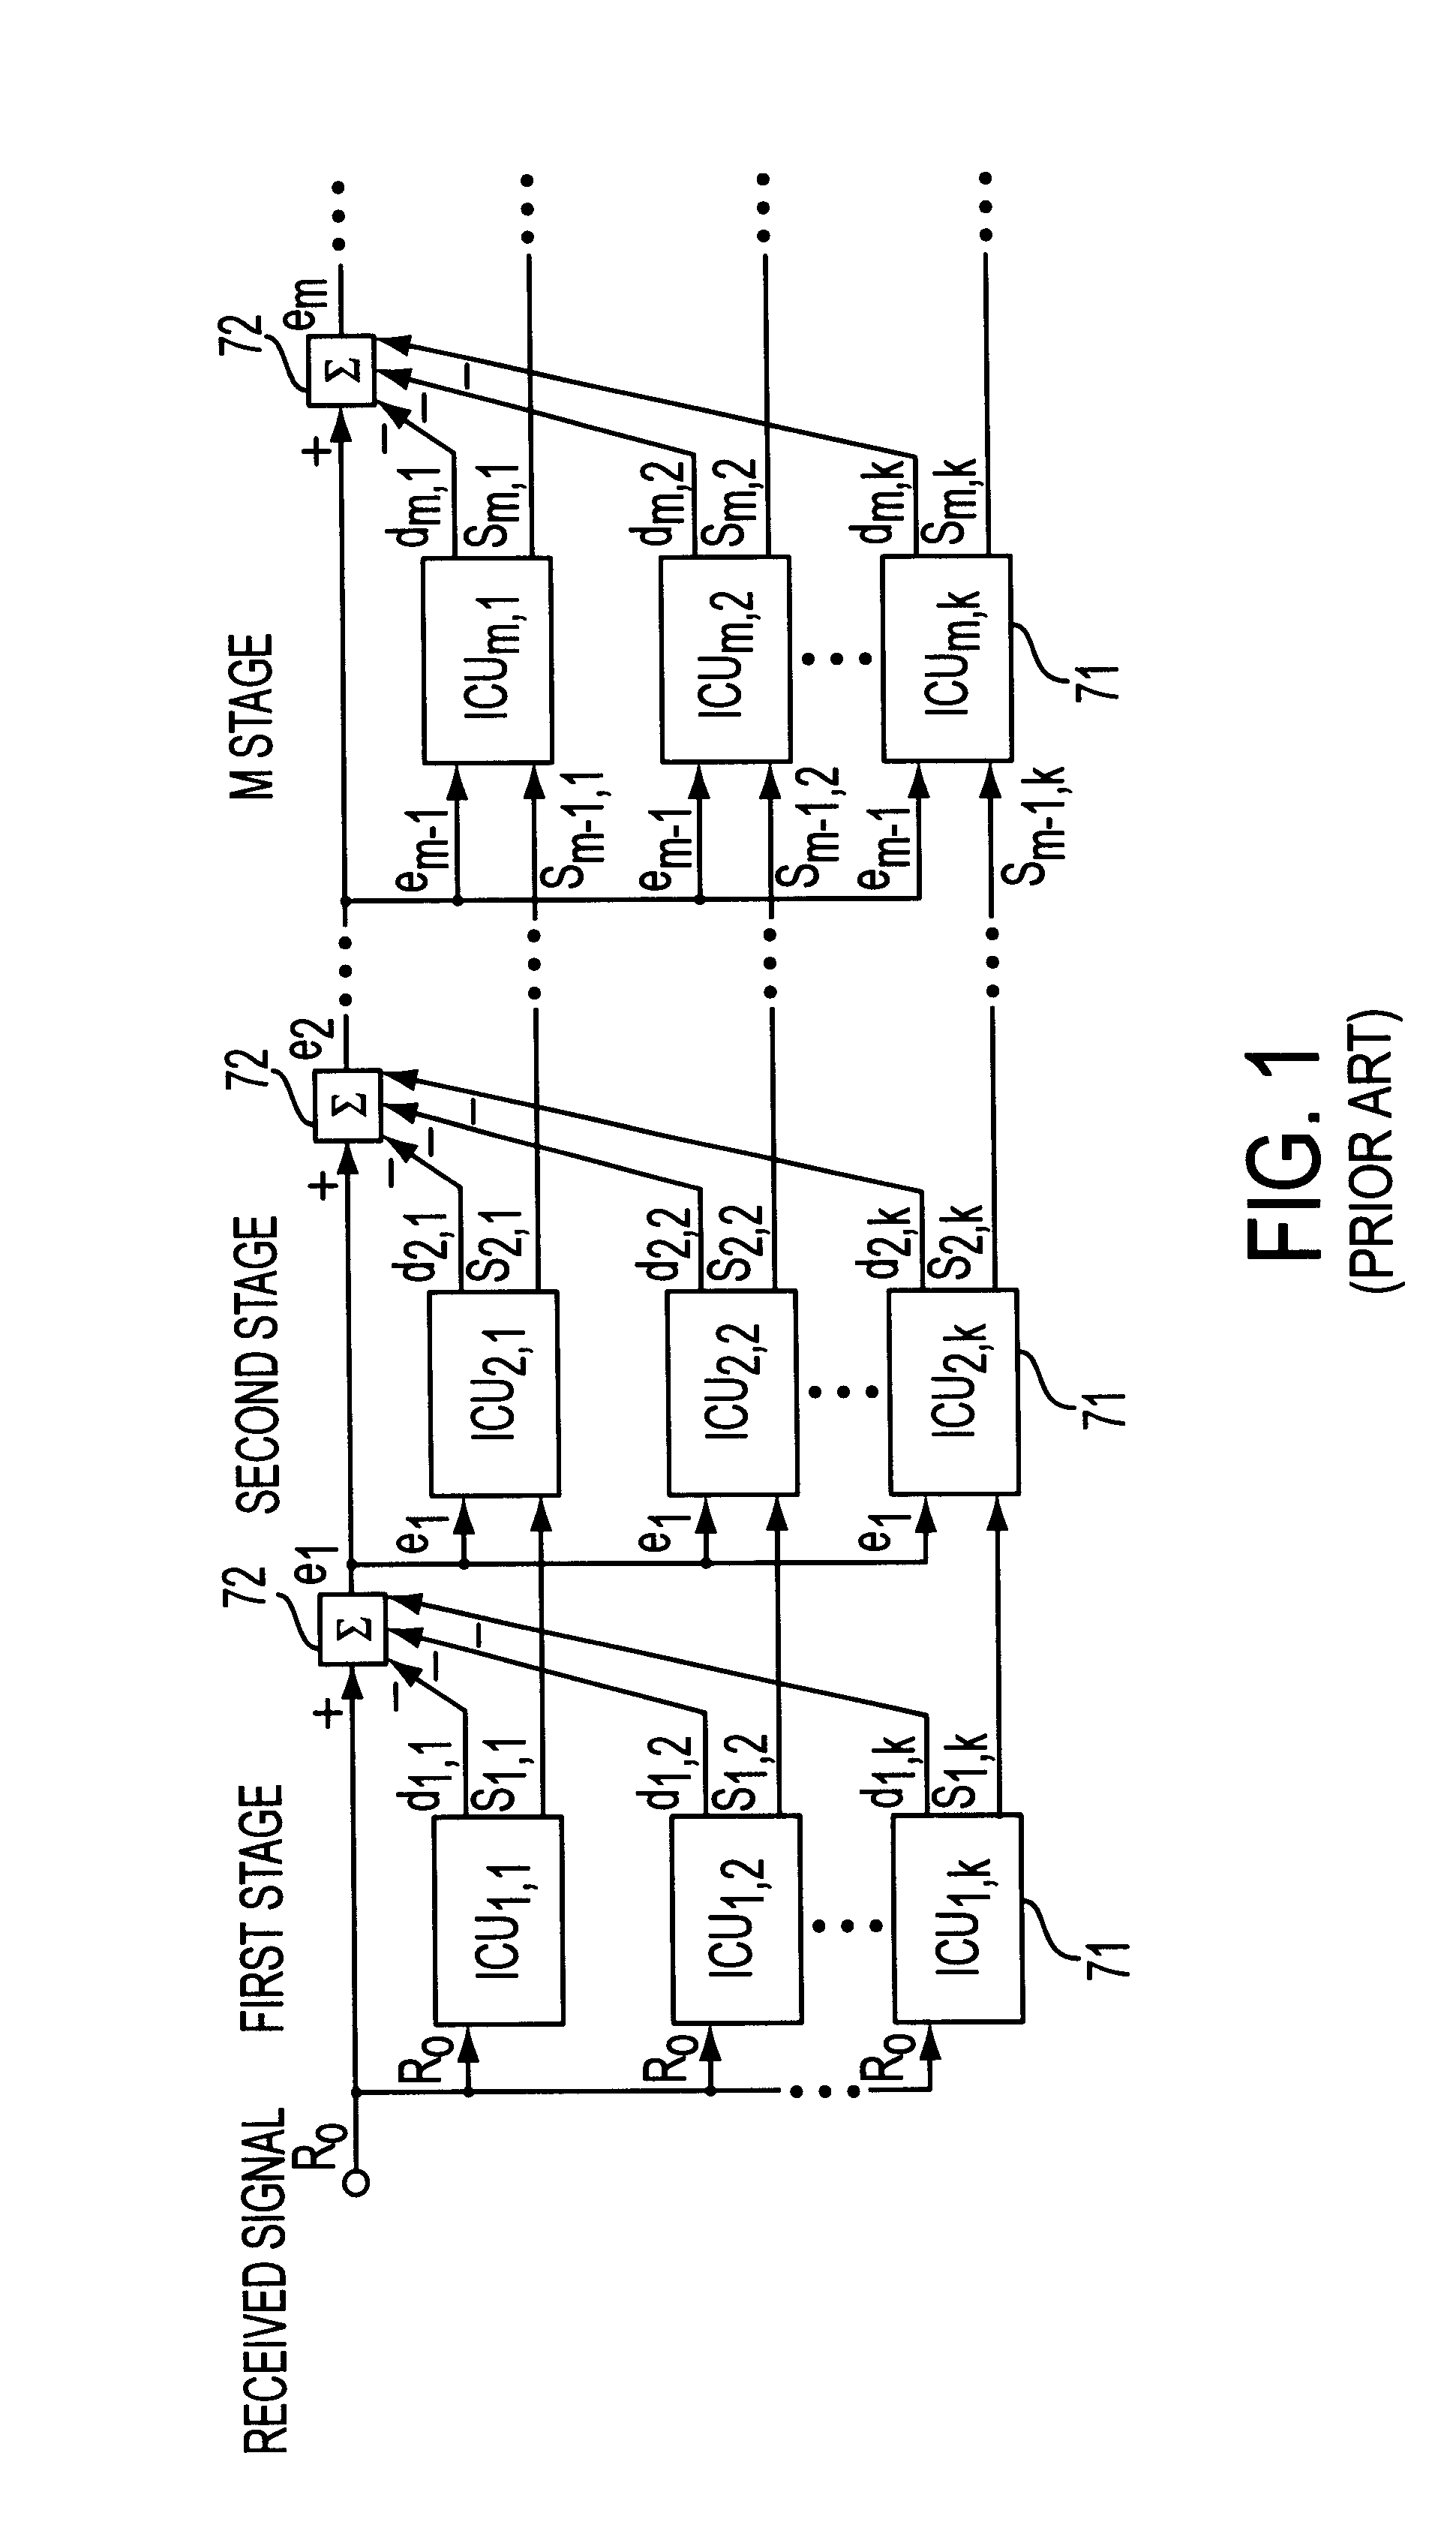 Multistage interference canceller